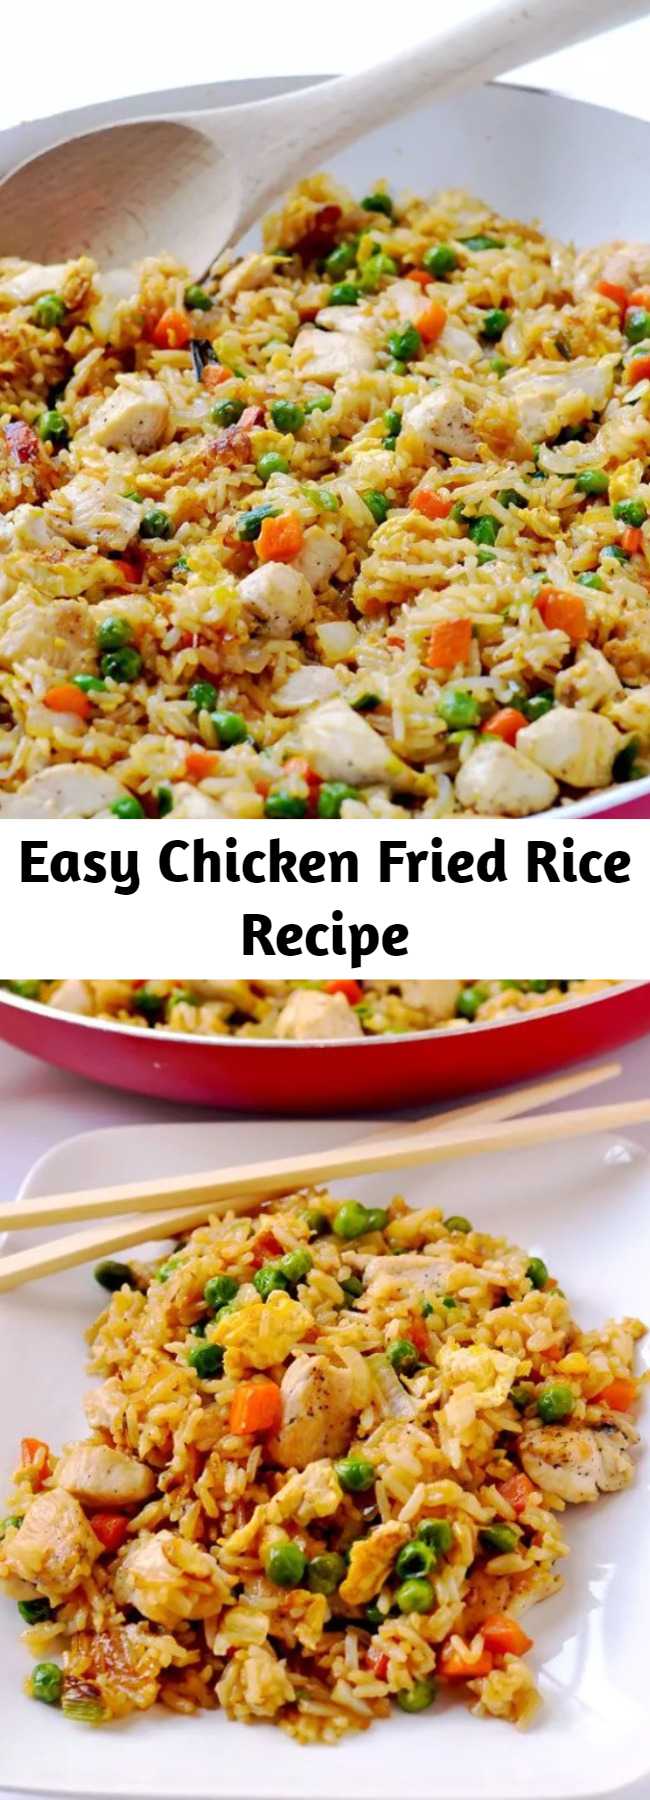 Easy Chicken Fried Rice Recipe - Skip the take-out and make this easy chicken fried rice at home. It's a simple weeknight dinner that's so budget friendly, and it's a real crowd-pleaser! #chicken #friedrice